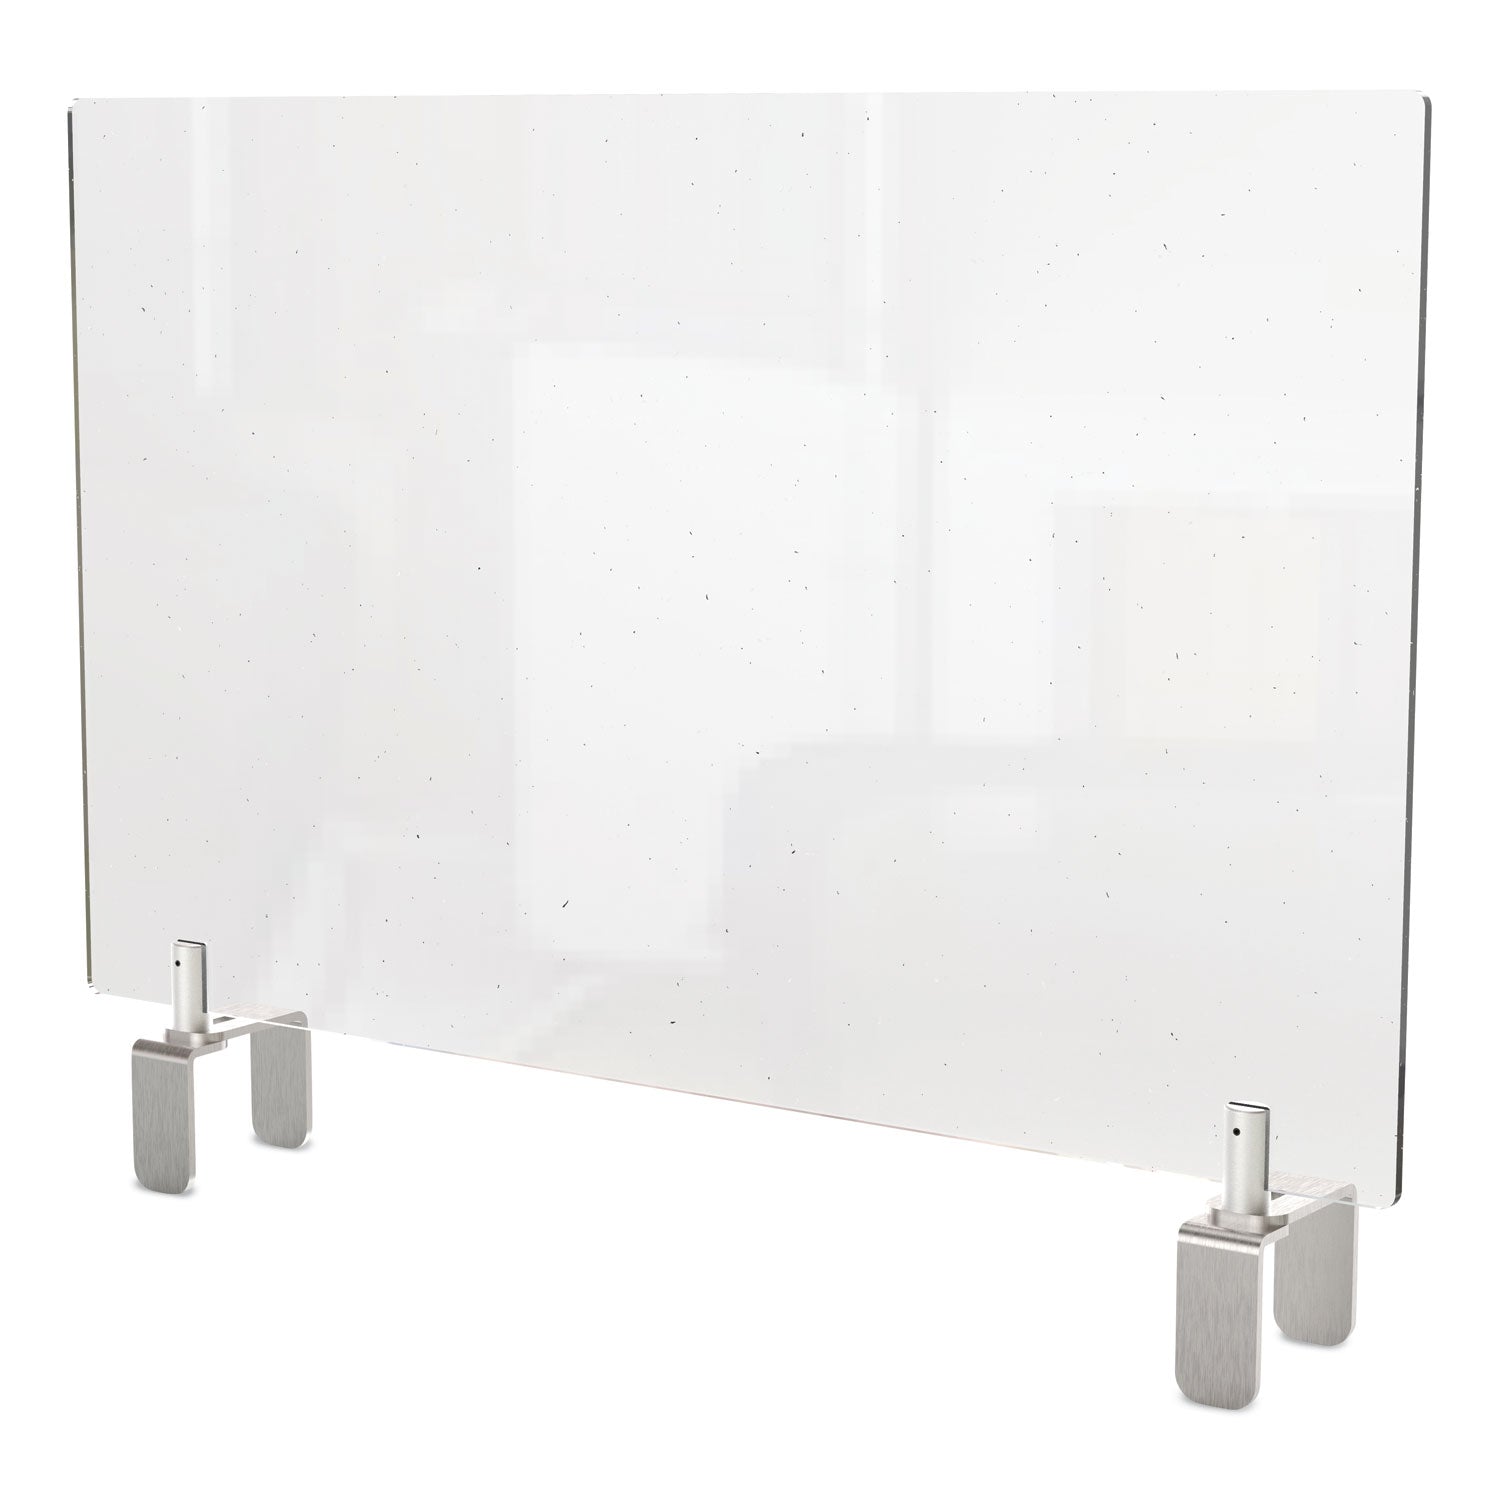 Clear Partition Extender with Attached Clamp, 36 x 3.88 x 24, Thermoplastic Sheeting Flipcost Flipcost